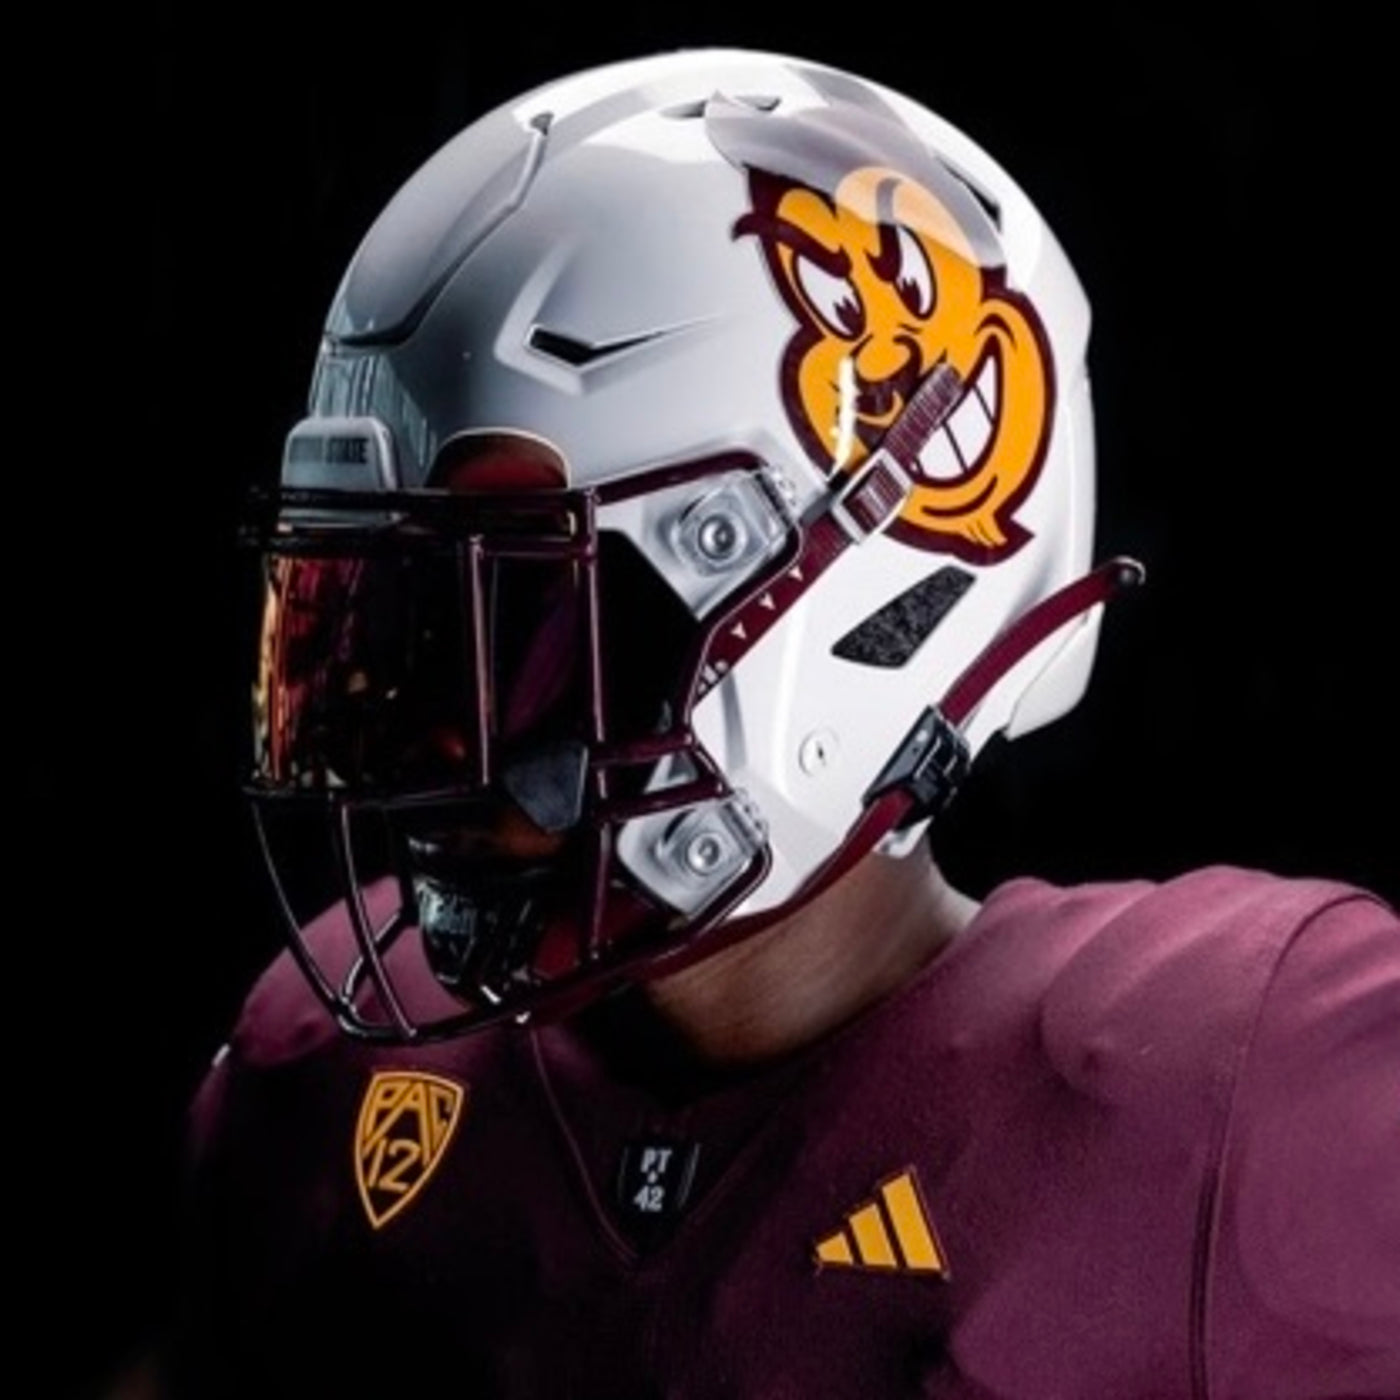 ASU white mini helmet with a large sparky mascot face on the side